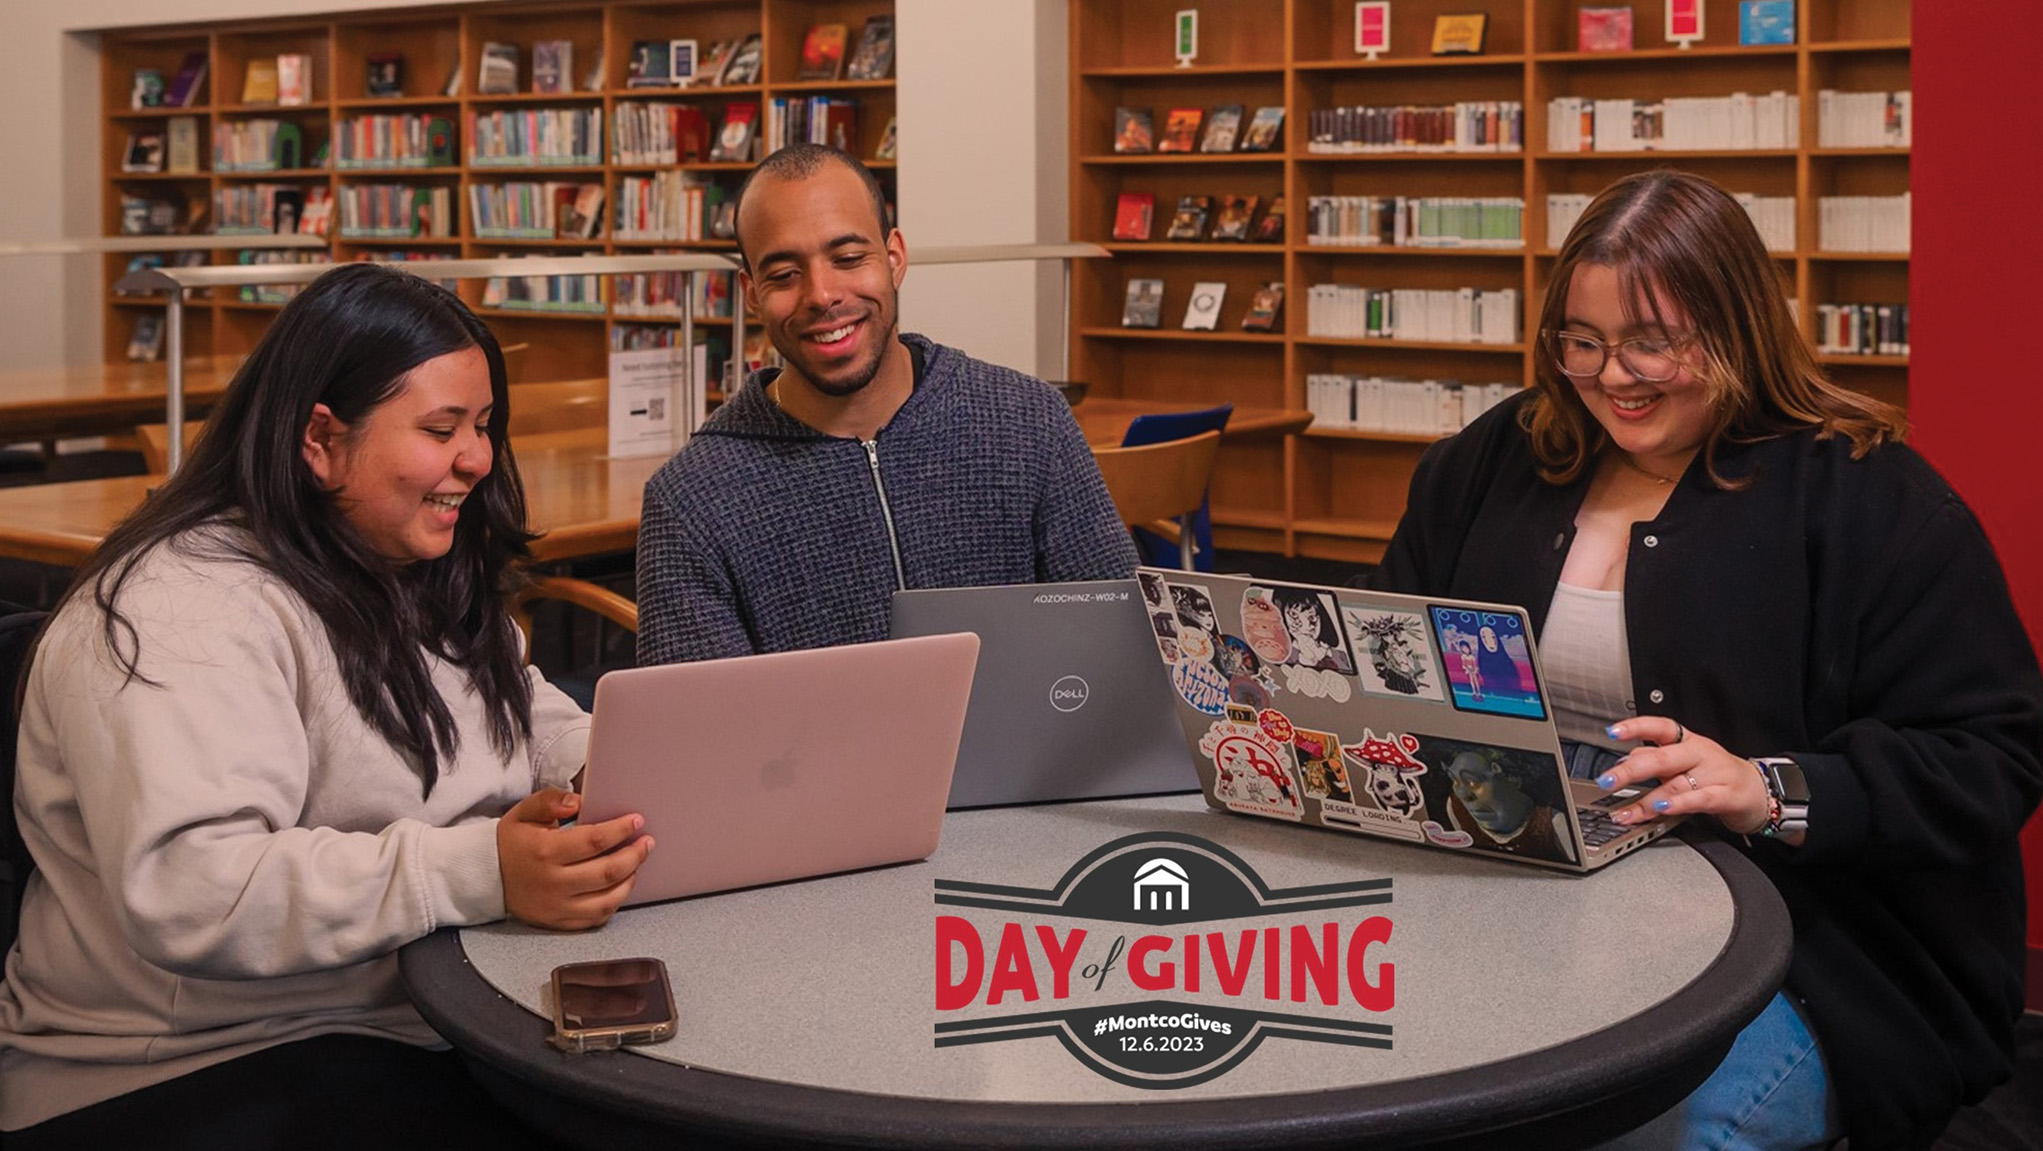 Students working on laptops in library and Day of Giving logo